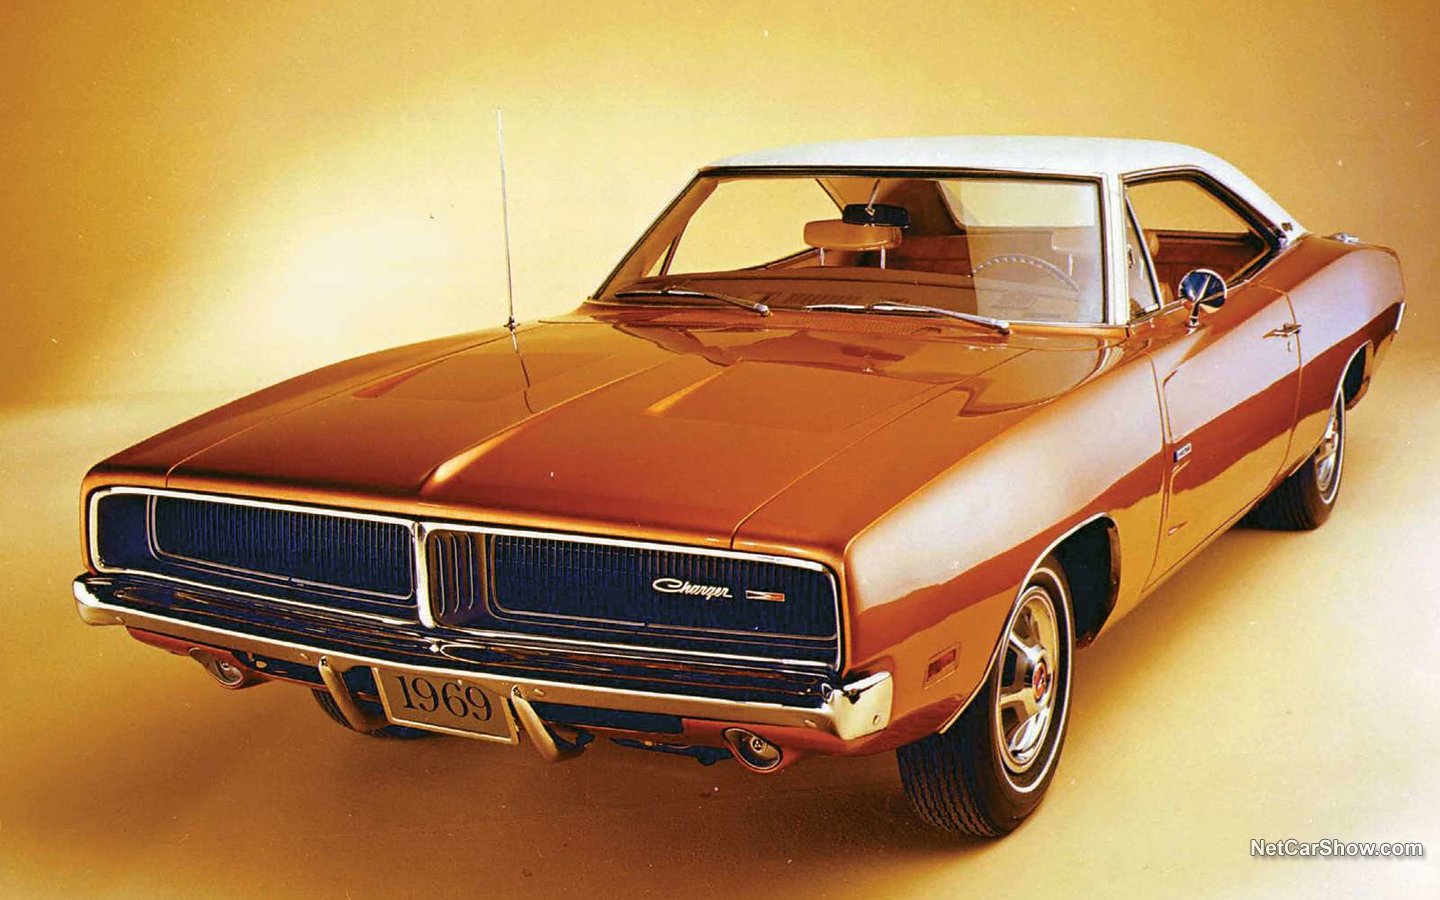 Dodge Charger 1969 ce569ce9